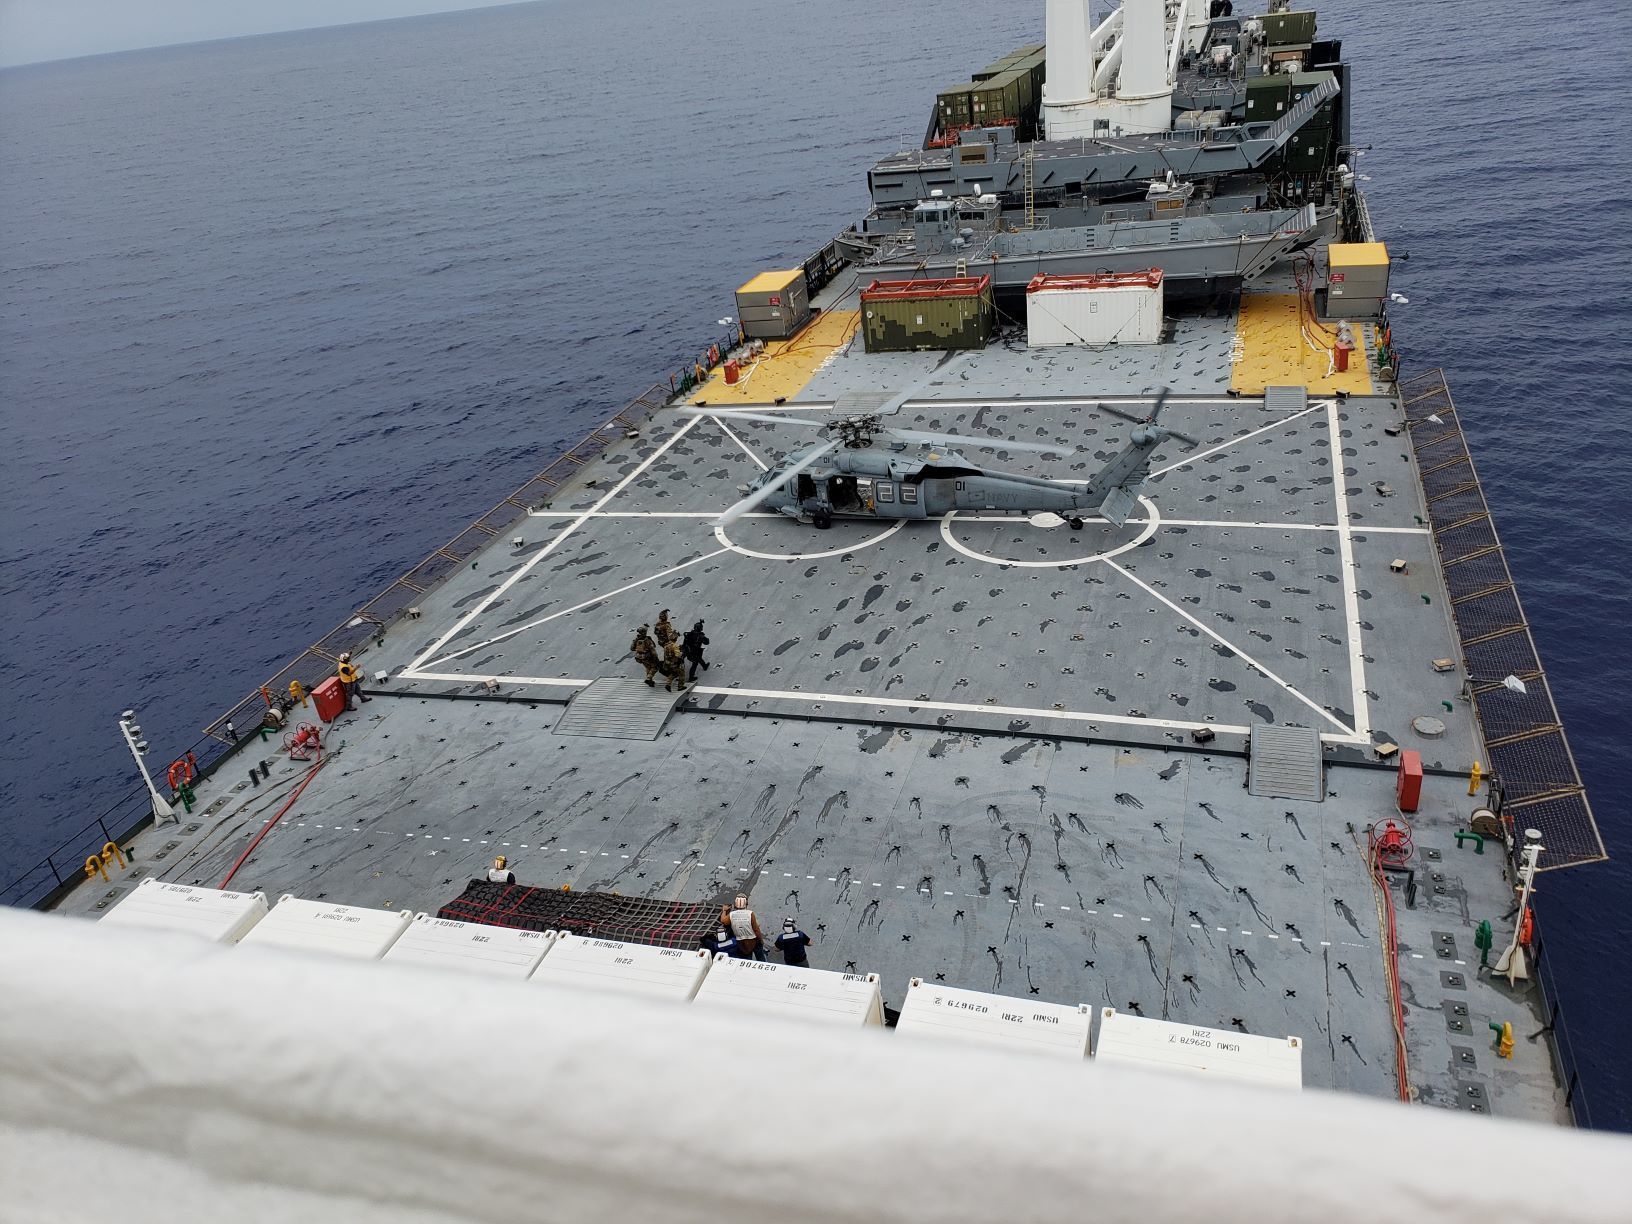 Military Sealift Command’s prepositioning and seabasing ship, USNS Pililaau (T-AKR 304), takes part in MALABAR 21 on Aug. 30.